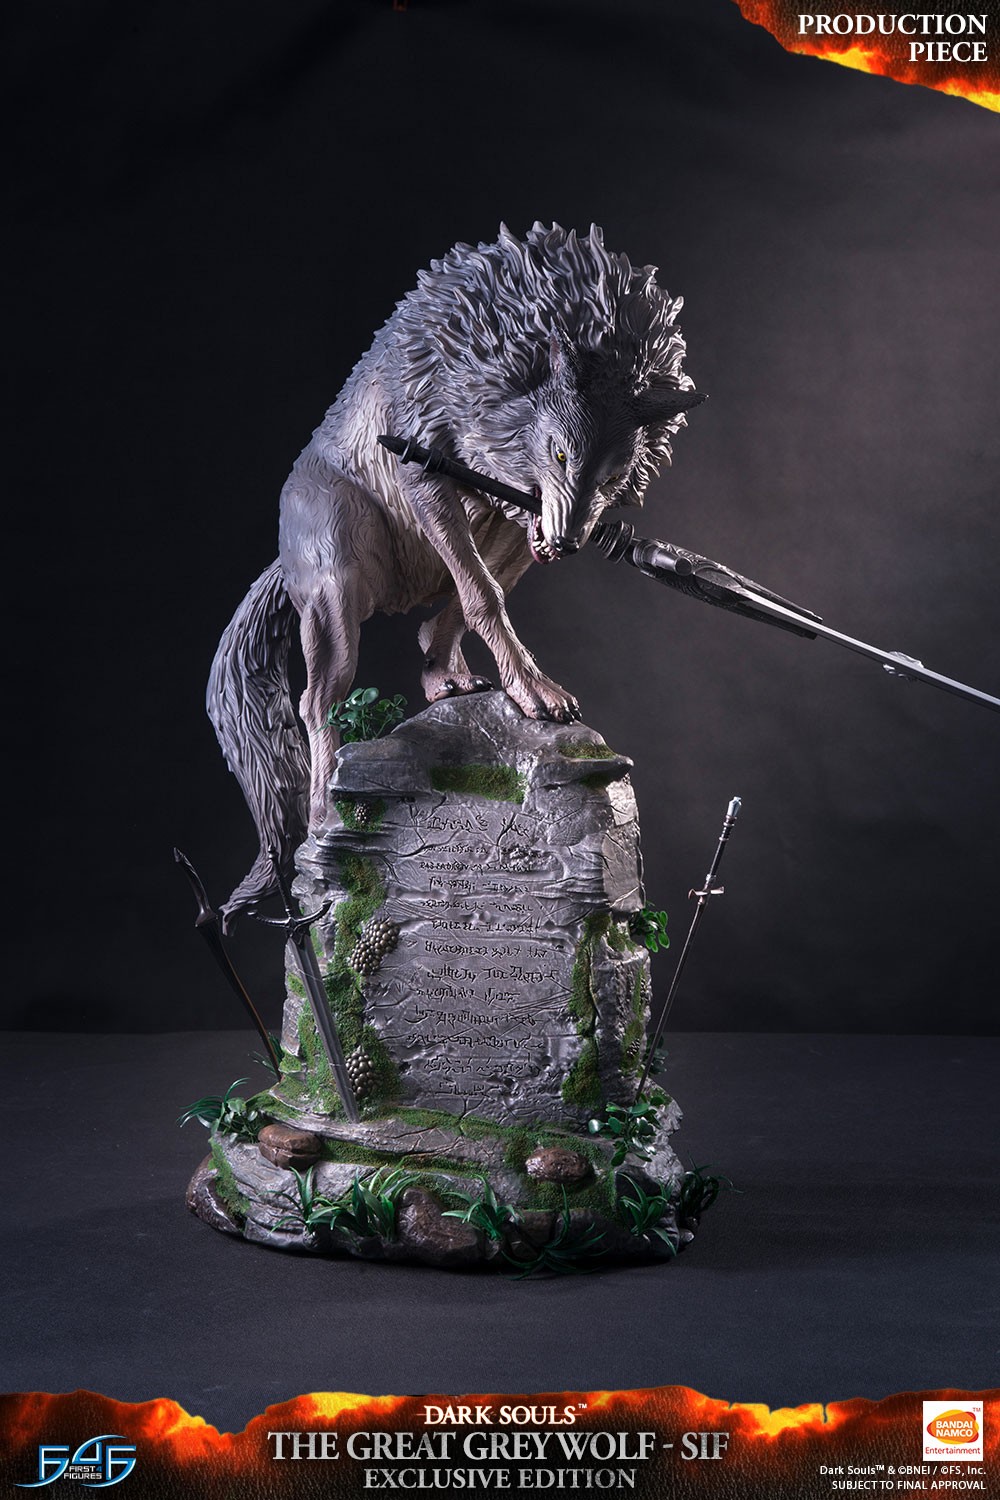 The Great Grey Wolf, Sif